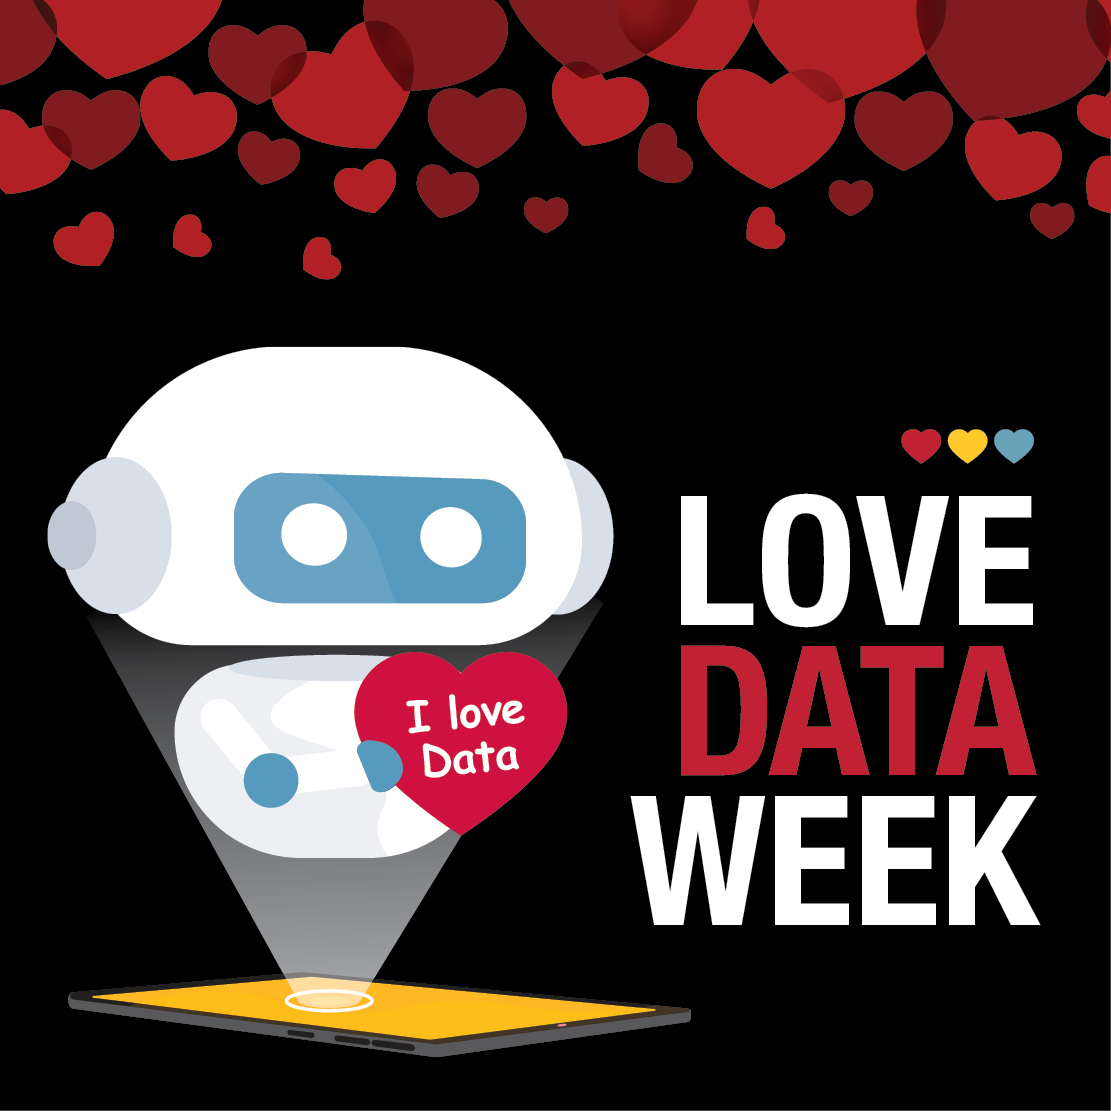 Text on graphic reads "Love Data Week" with an image of a robot holding a heart that says "I love data."